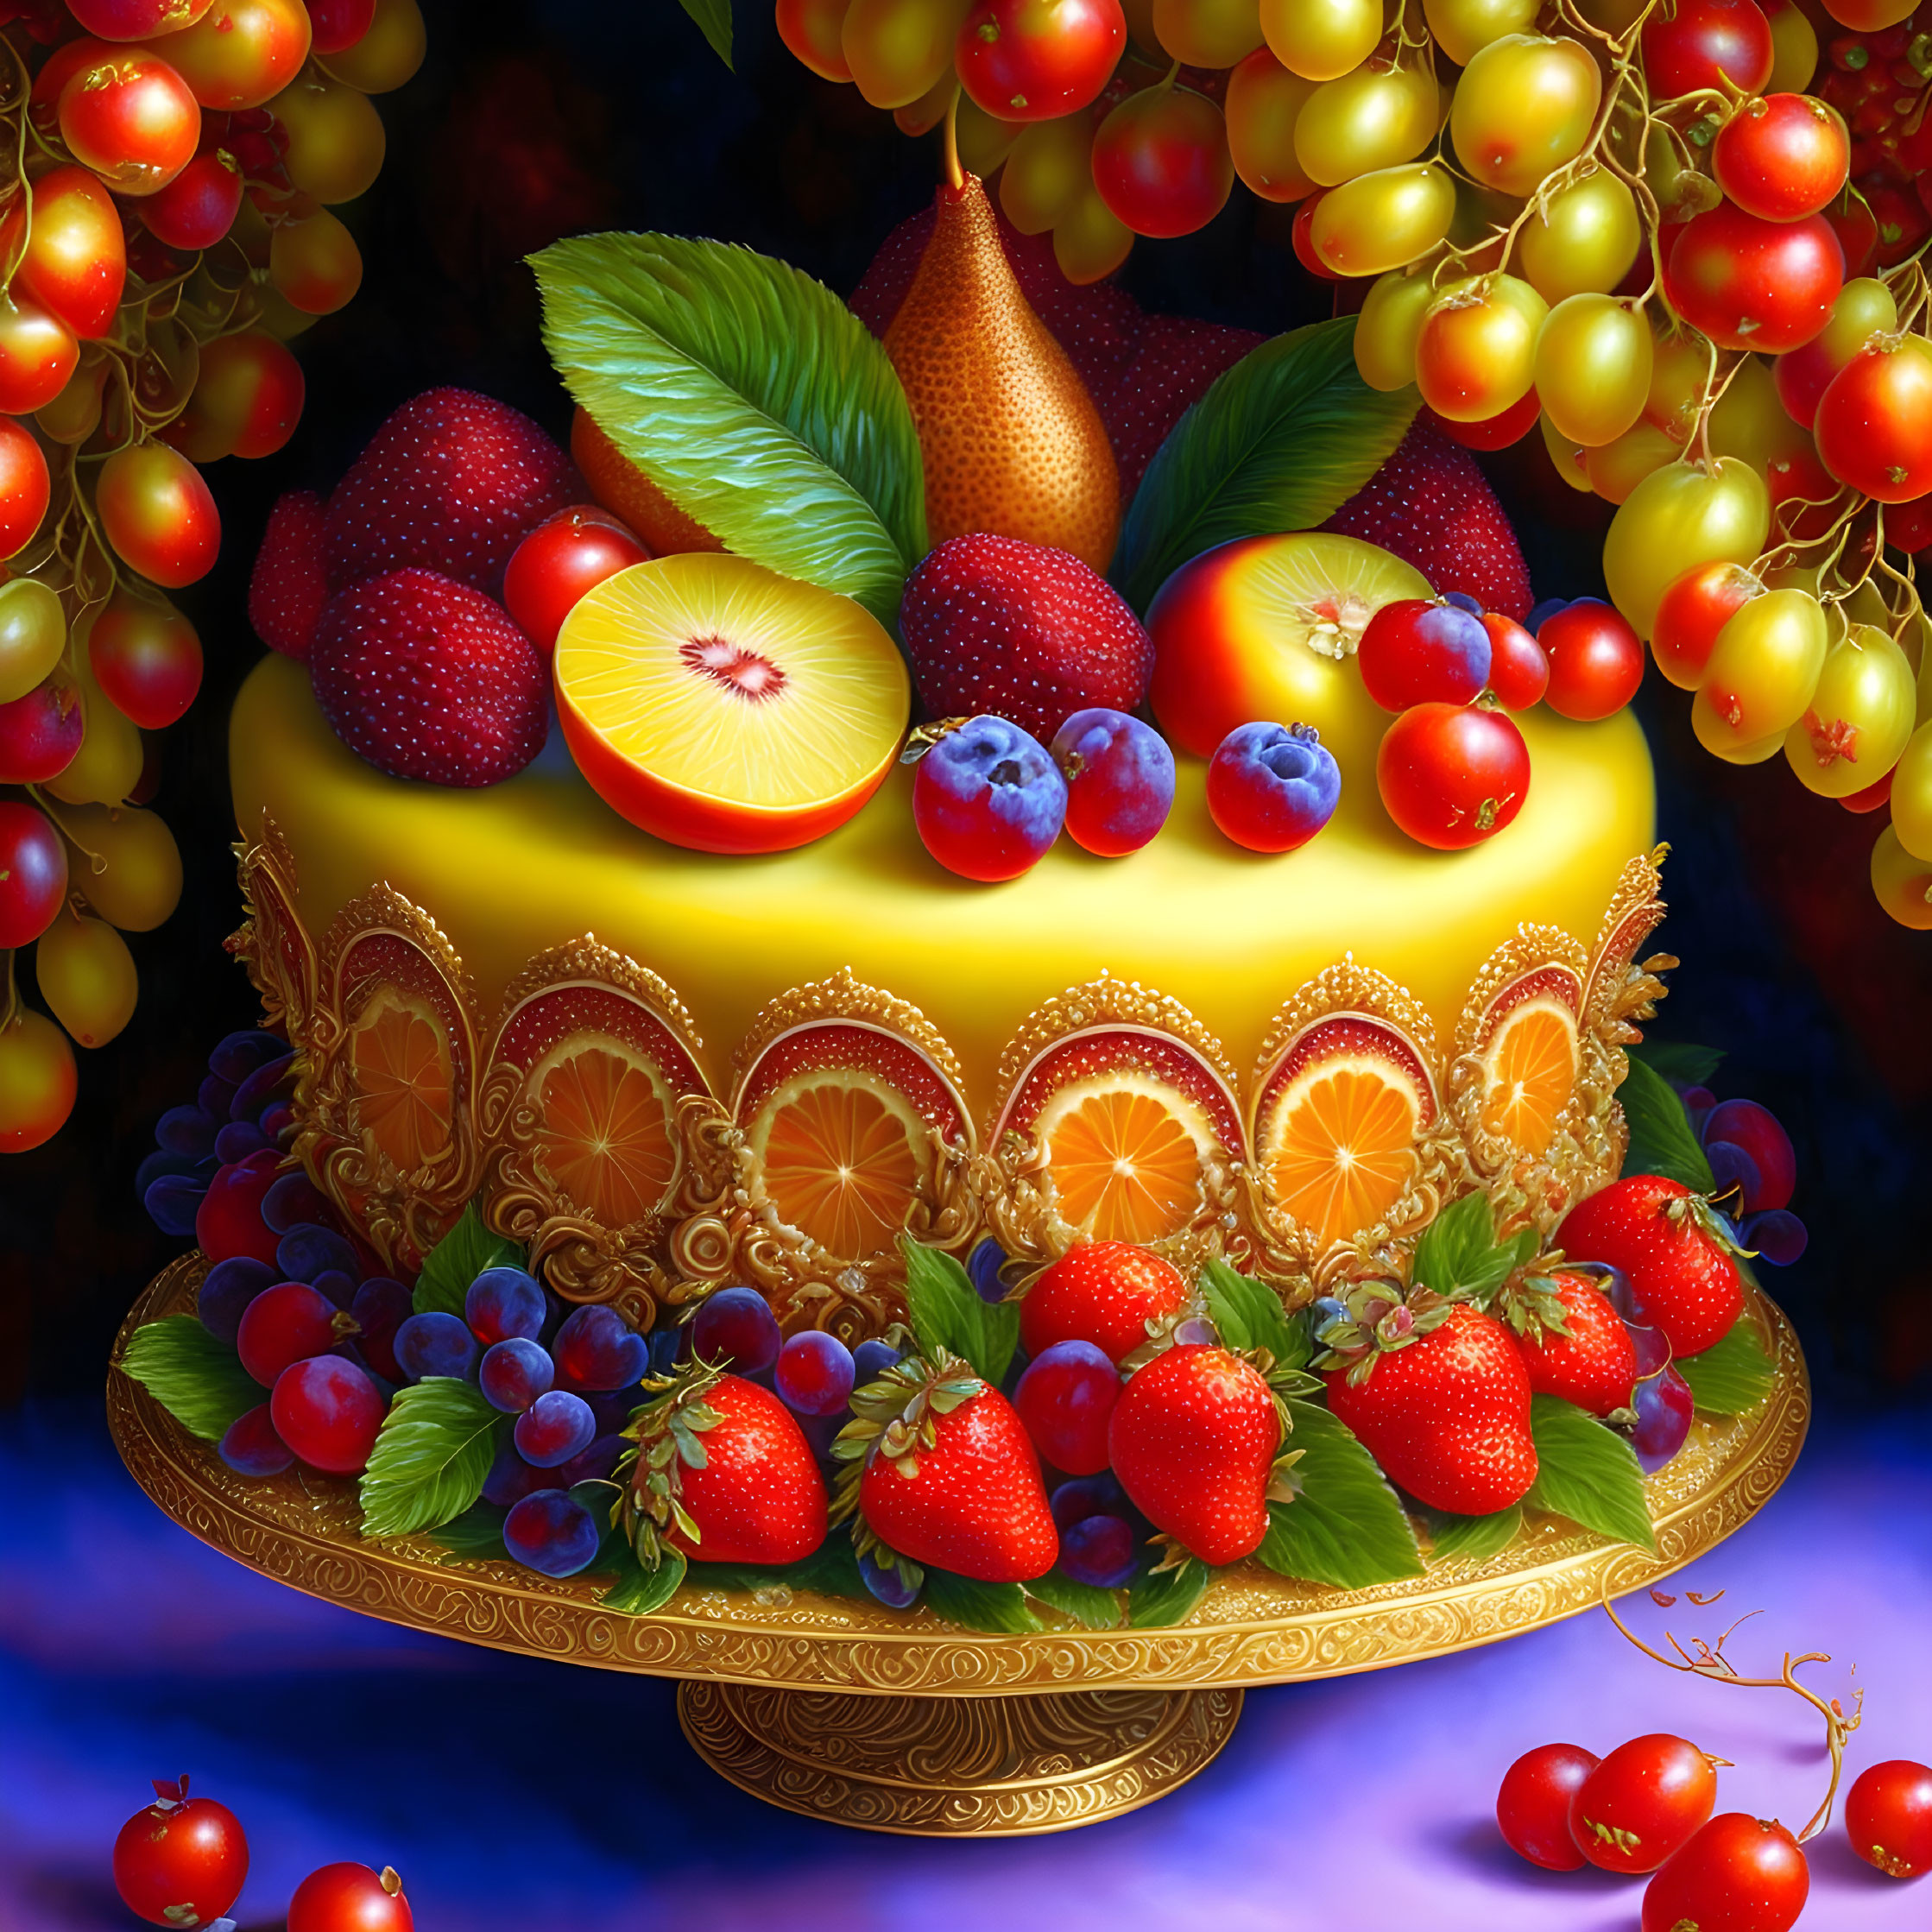 Colorful Fruit-Topped Cake with Ornate Decorations on Gold Stand